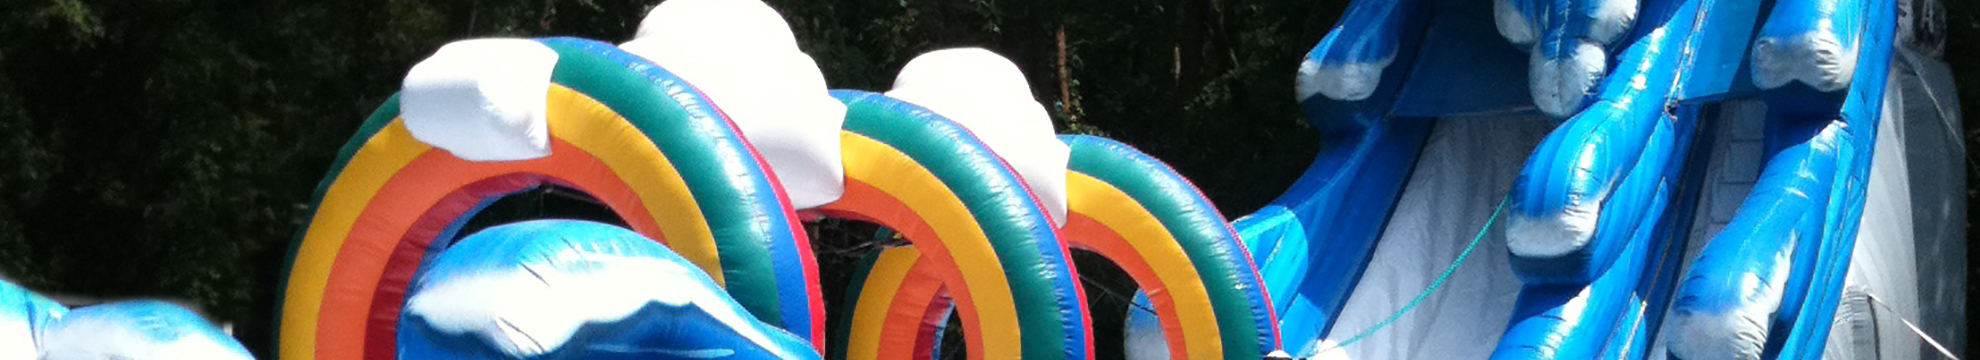 Water Slides for Rent from Rainbow Promotions